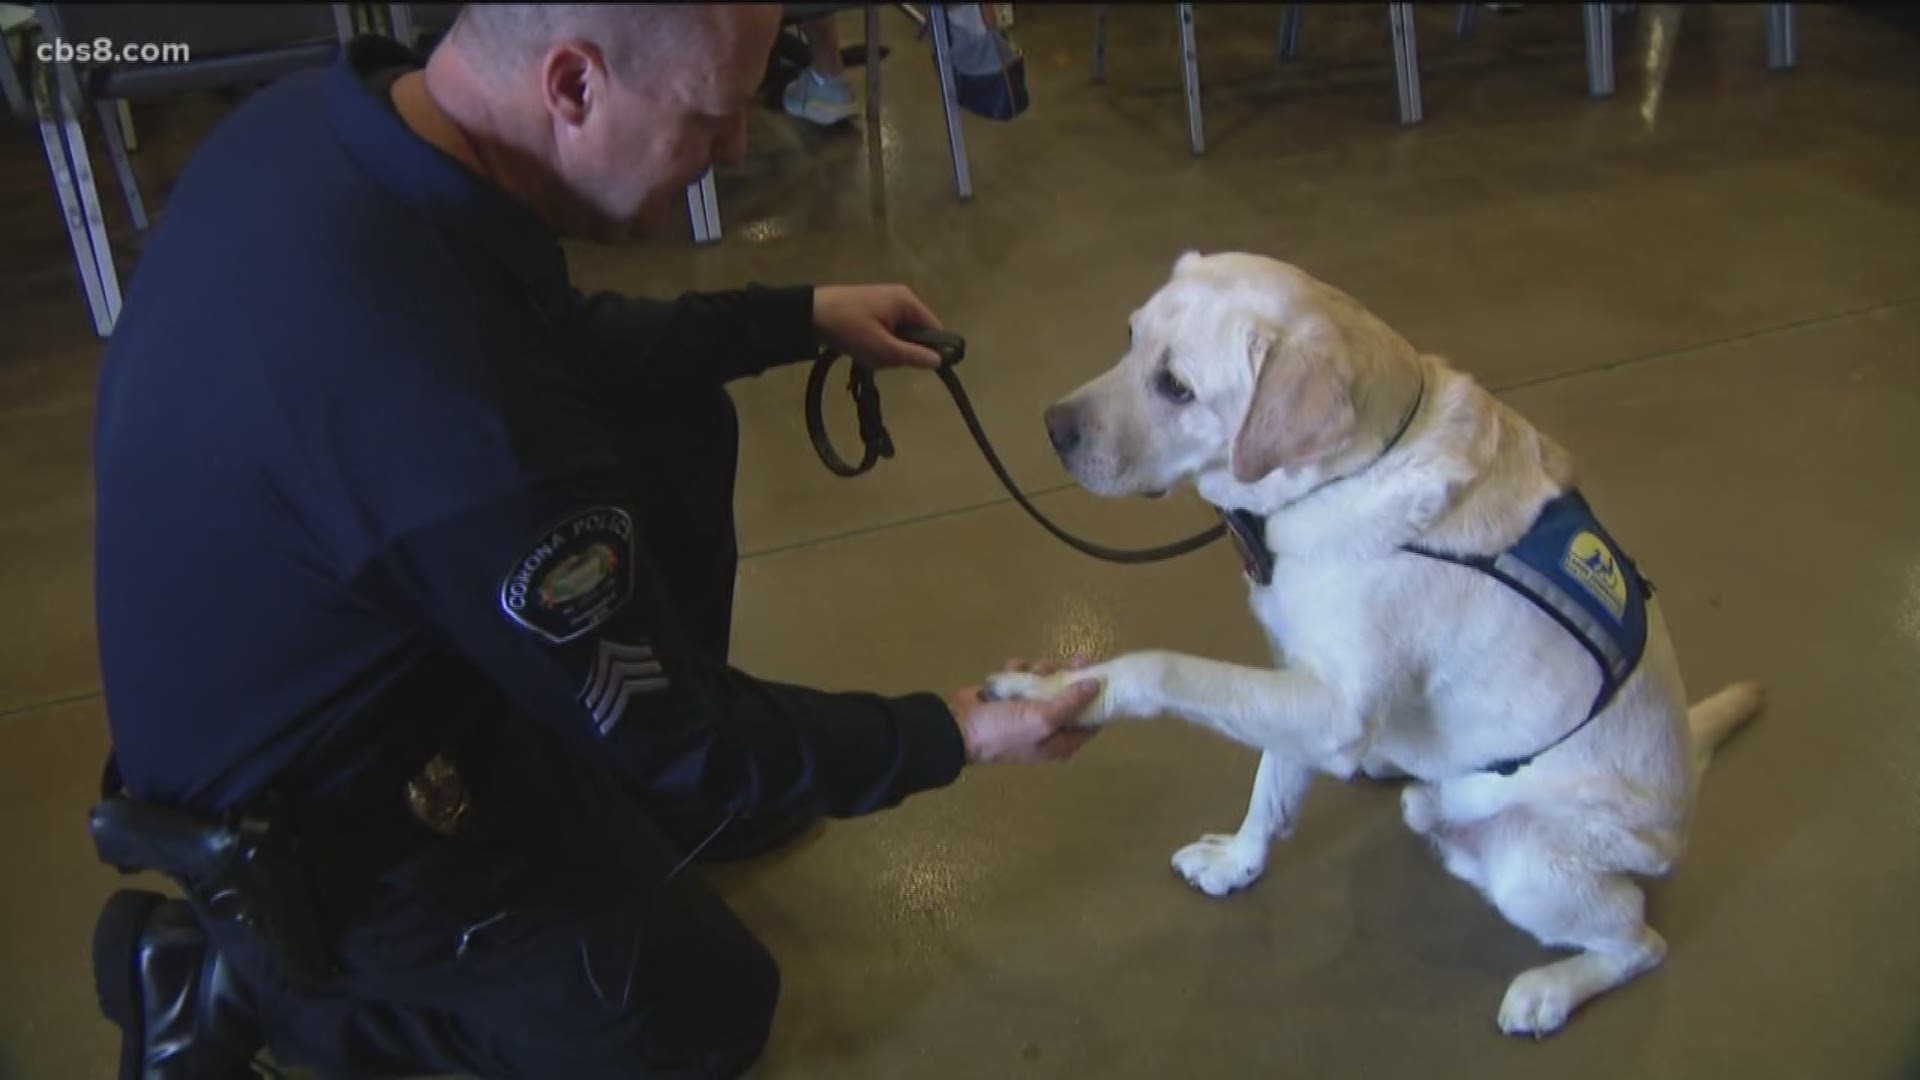 Twelve highly trained canines and their handlers graduated Friday from a local training facility. Now they will help a dozen new people on their way to greater independence. News 8's photojournalist Tim Blodgett takes us to Oceanside to meet the professional pups and their new owners they will be helping lead new lives.